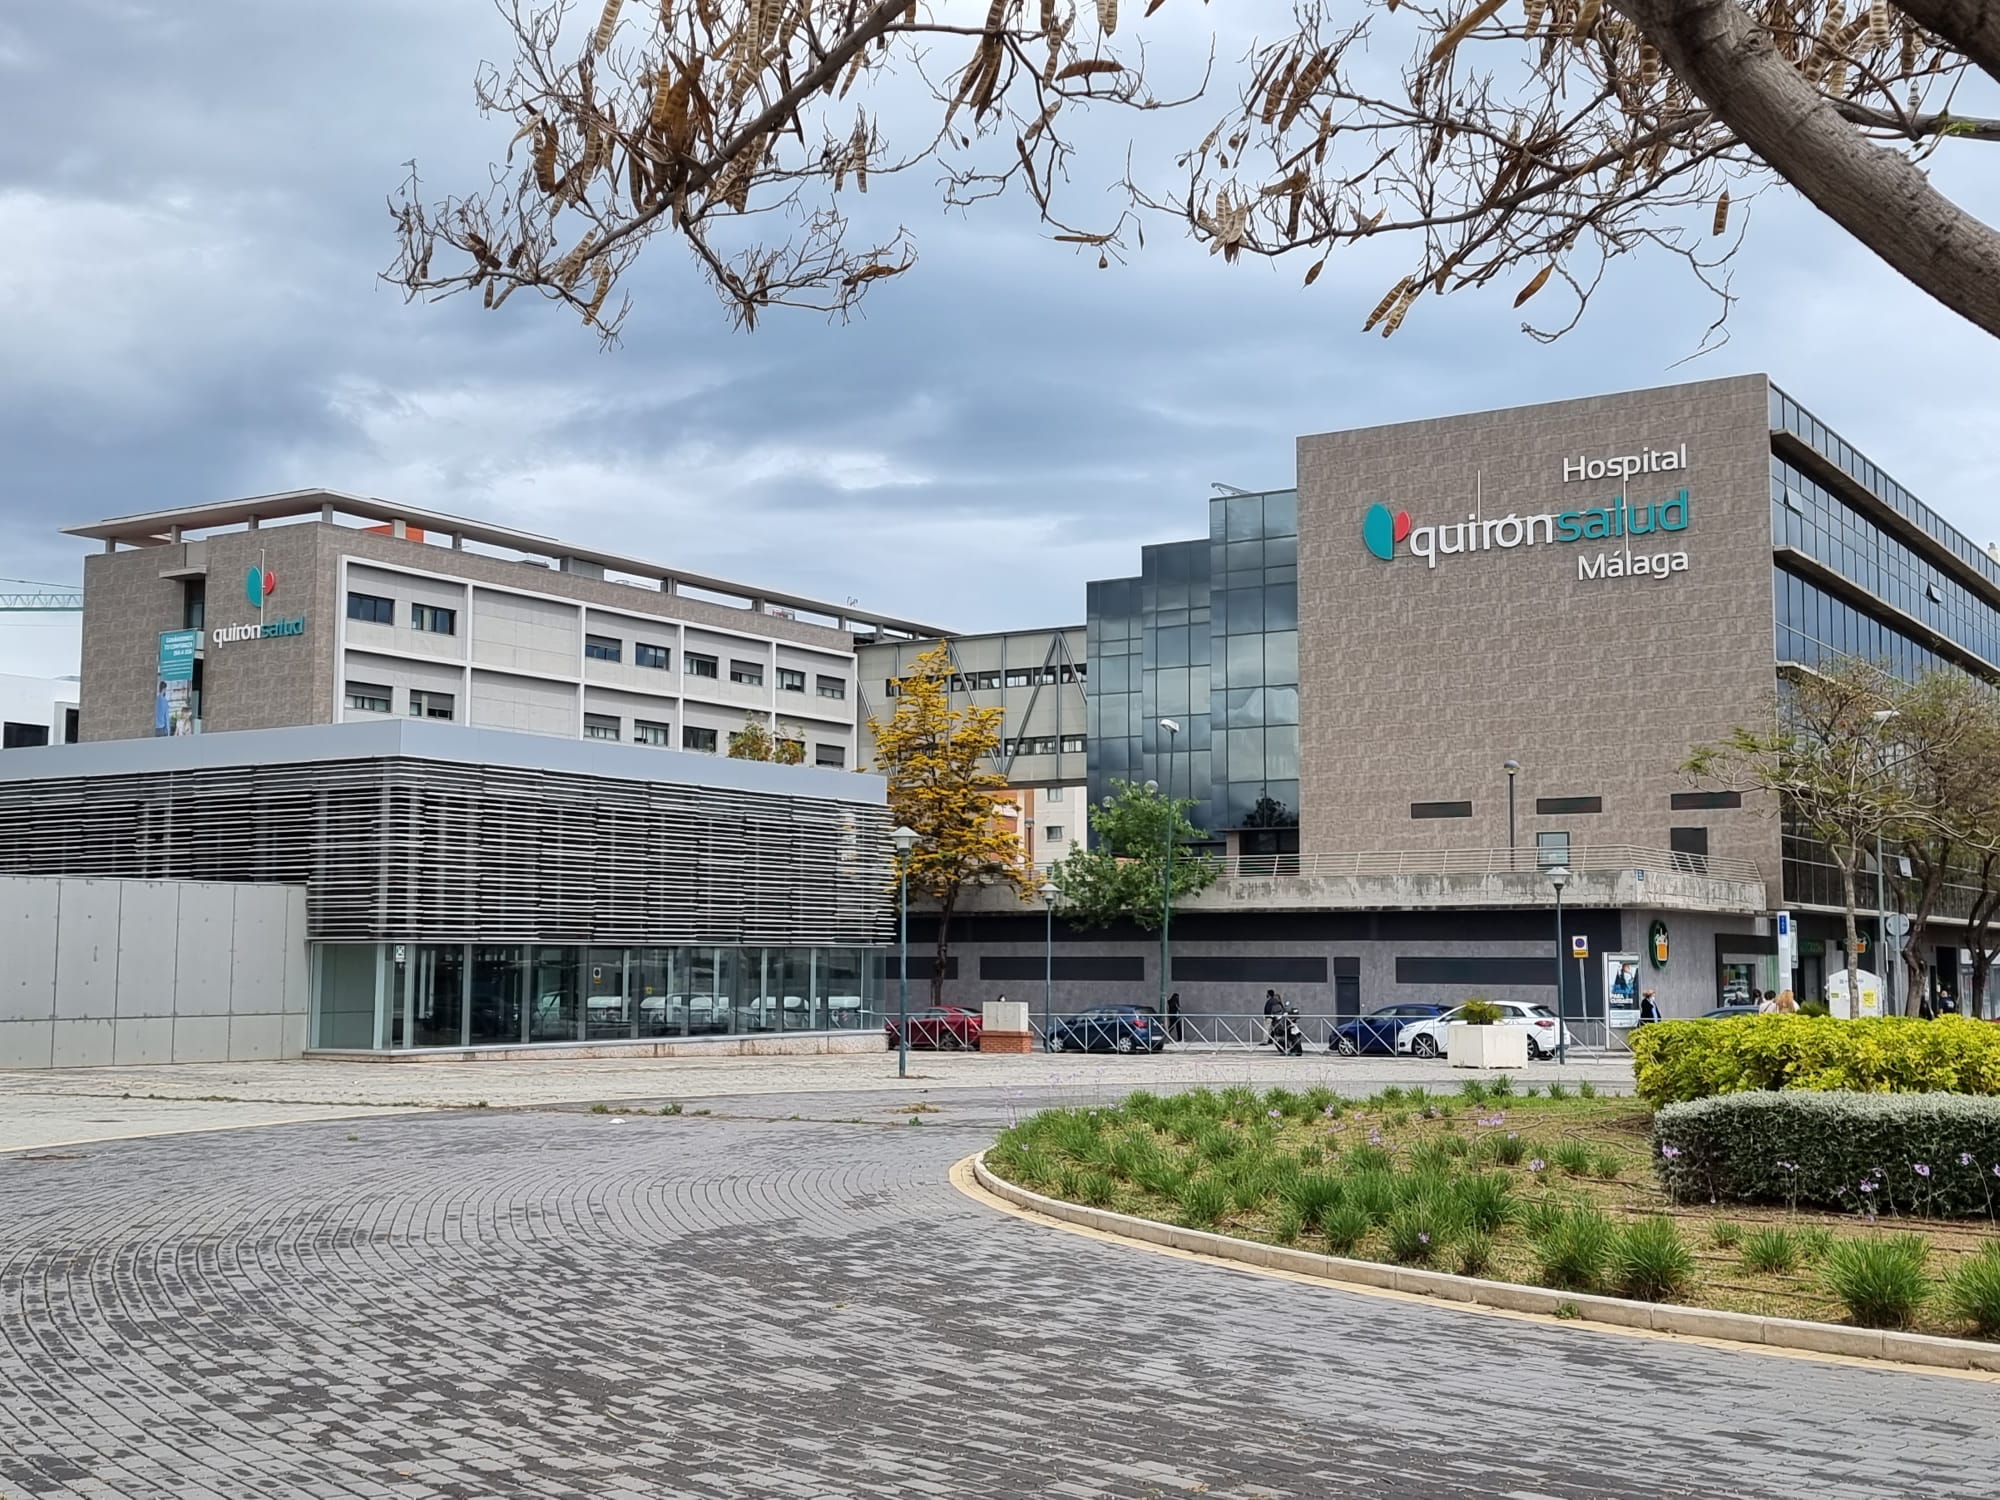 a panoramic image of the quiron hospital in malaga